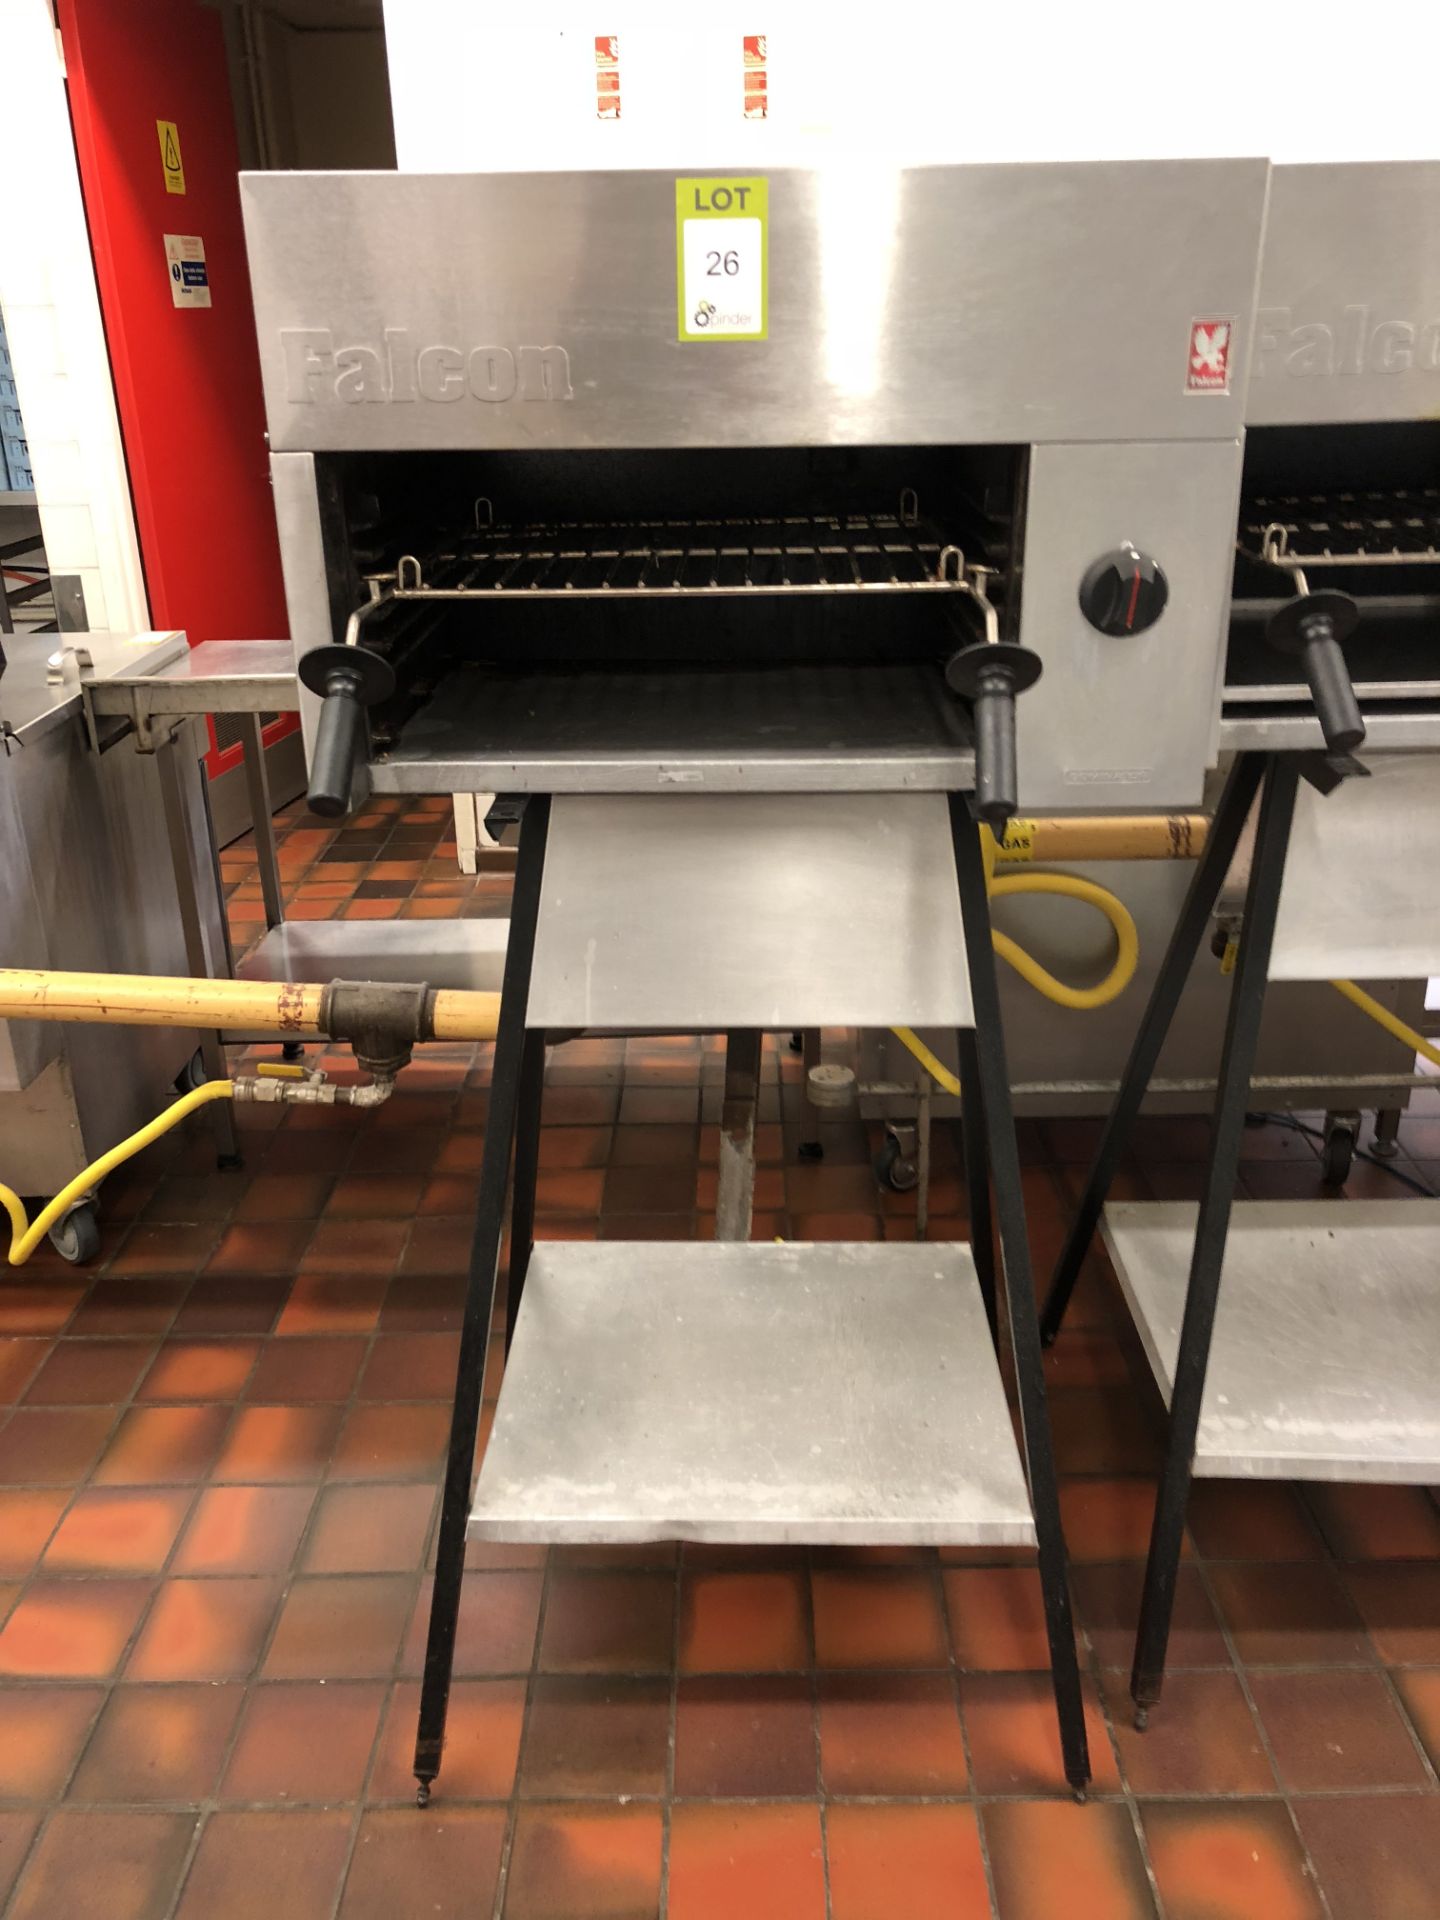 Falcon Dominator stand mounted gas fired Grill (located in Kitchen) - Image 2 of 2